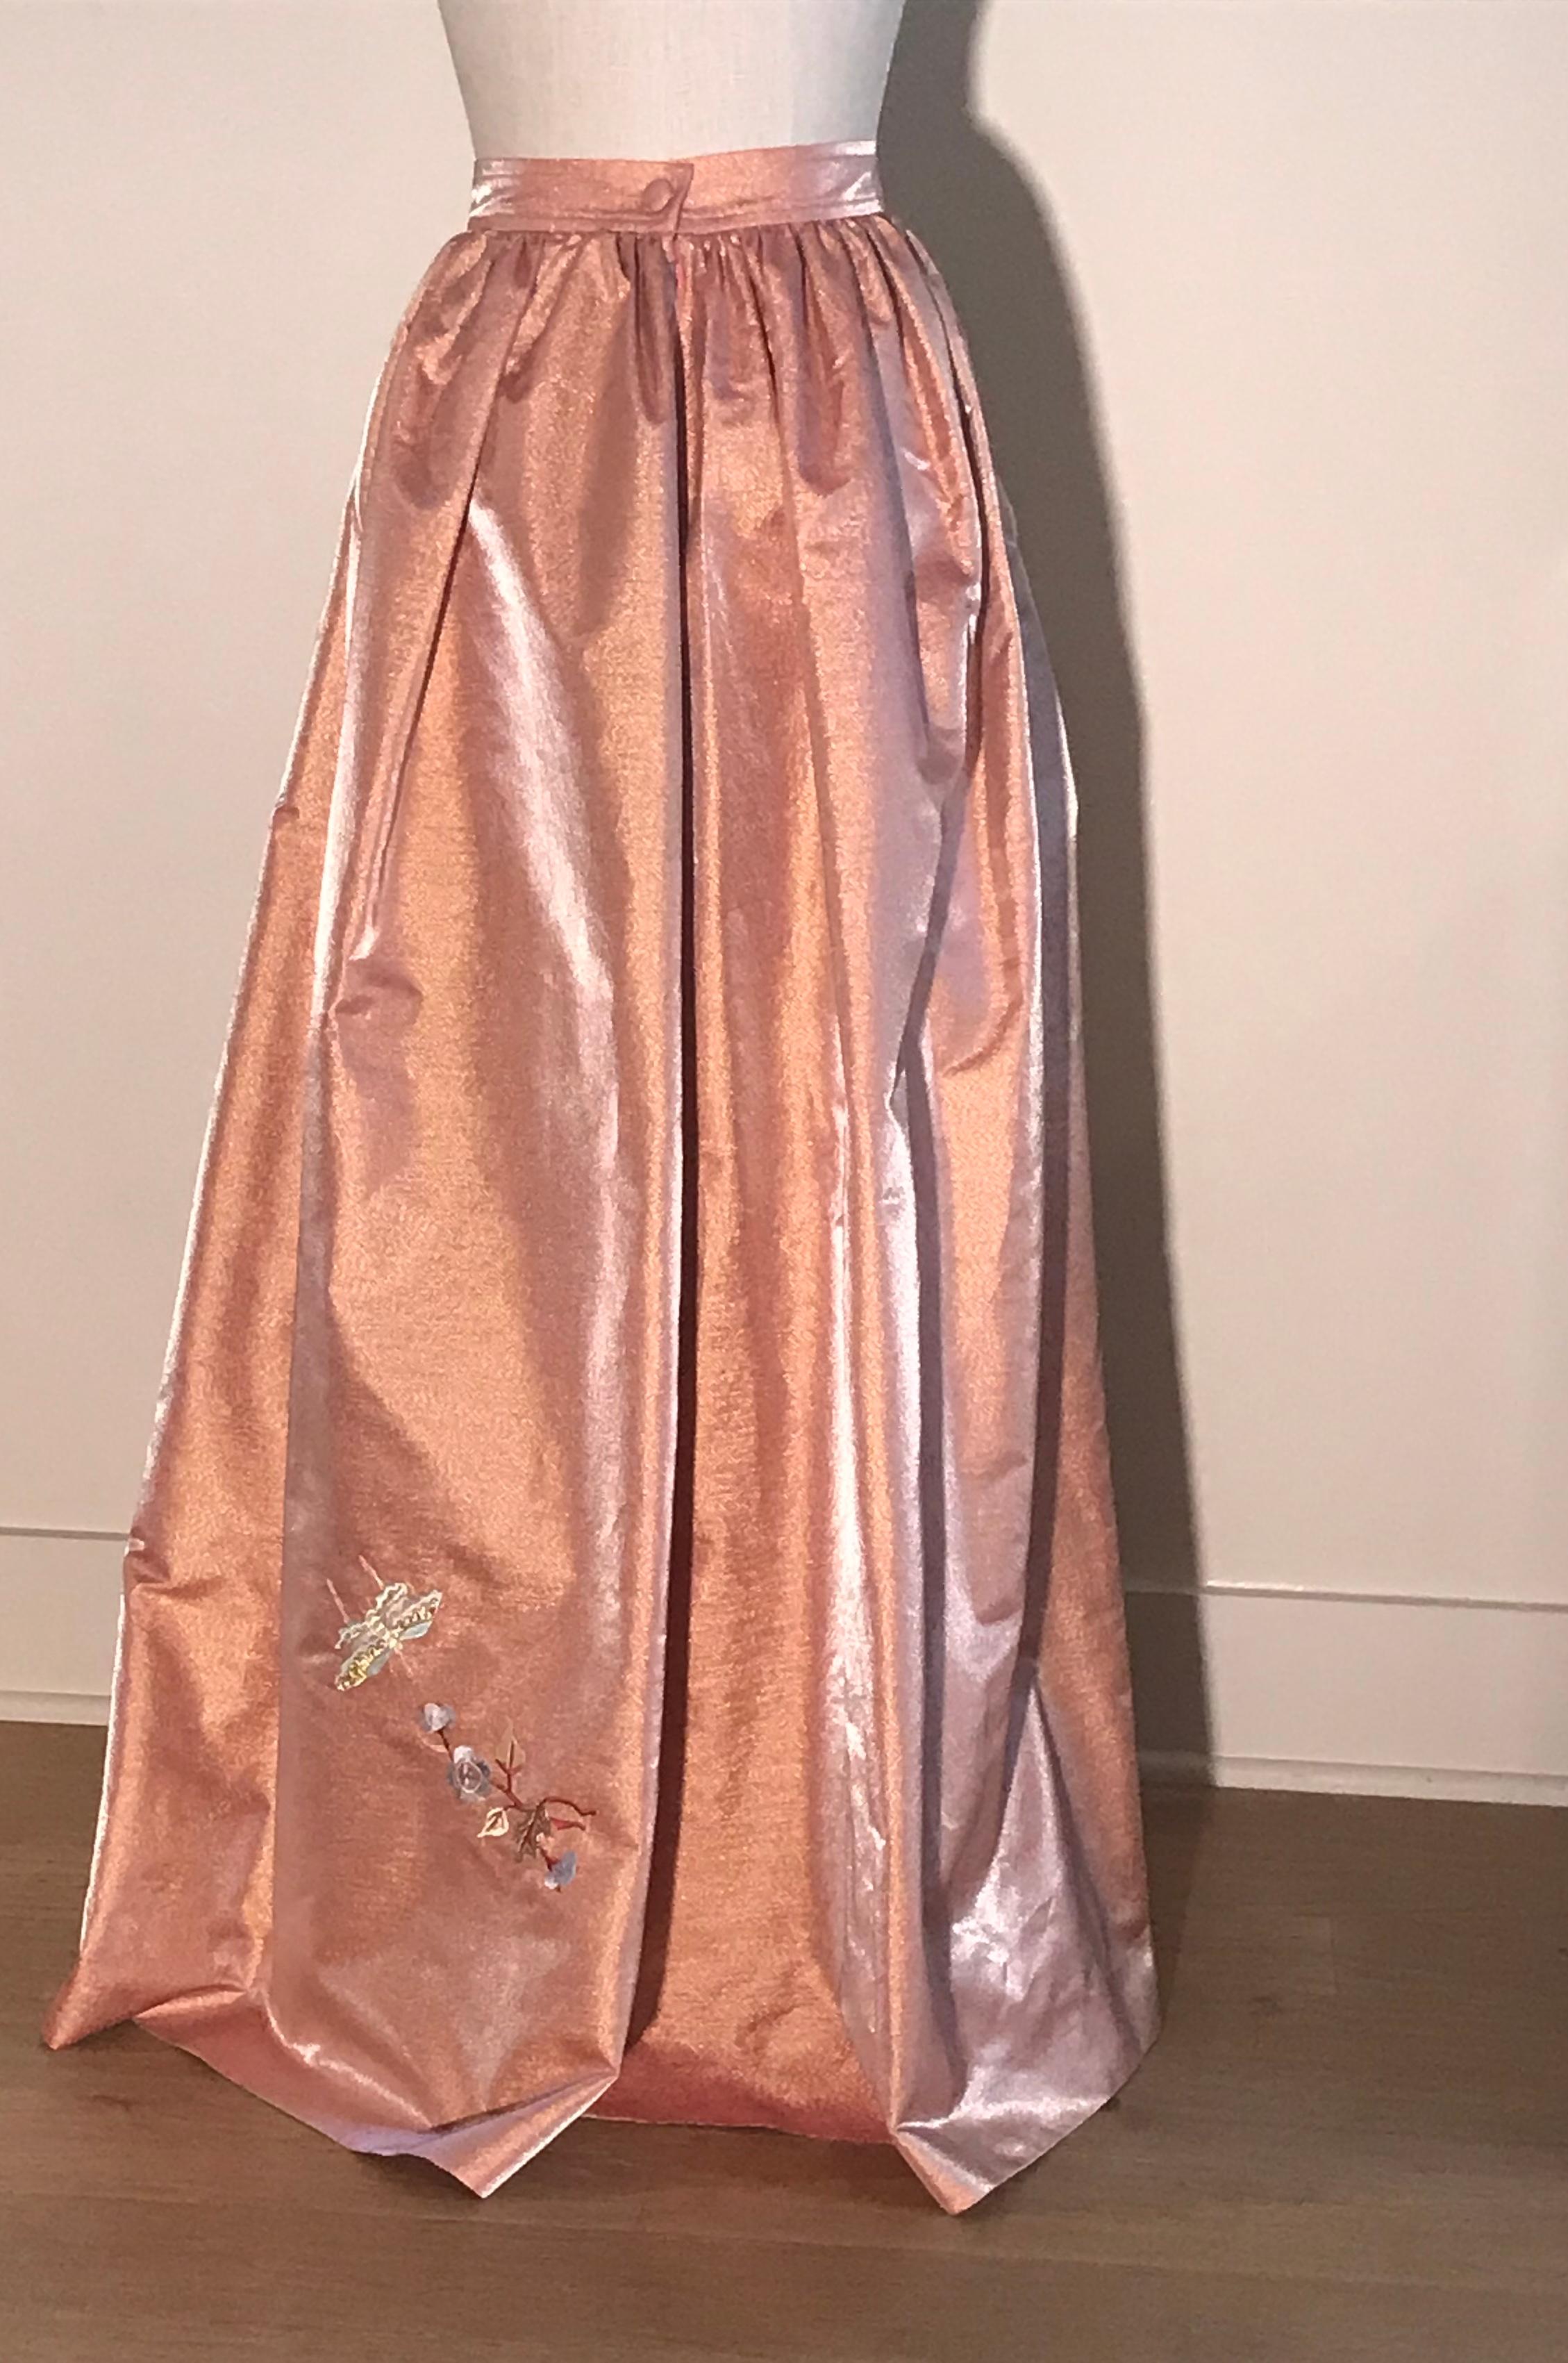 Christian Lacroix vintage embroidered full length skirt in salmon pink with a light metallic sheen. Bird, butterfly and floral motif at side front and a couple flowers at back. Side zip and cloth covered button. 

42% polyester, 31% metallic, 27%